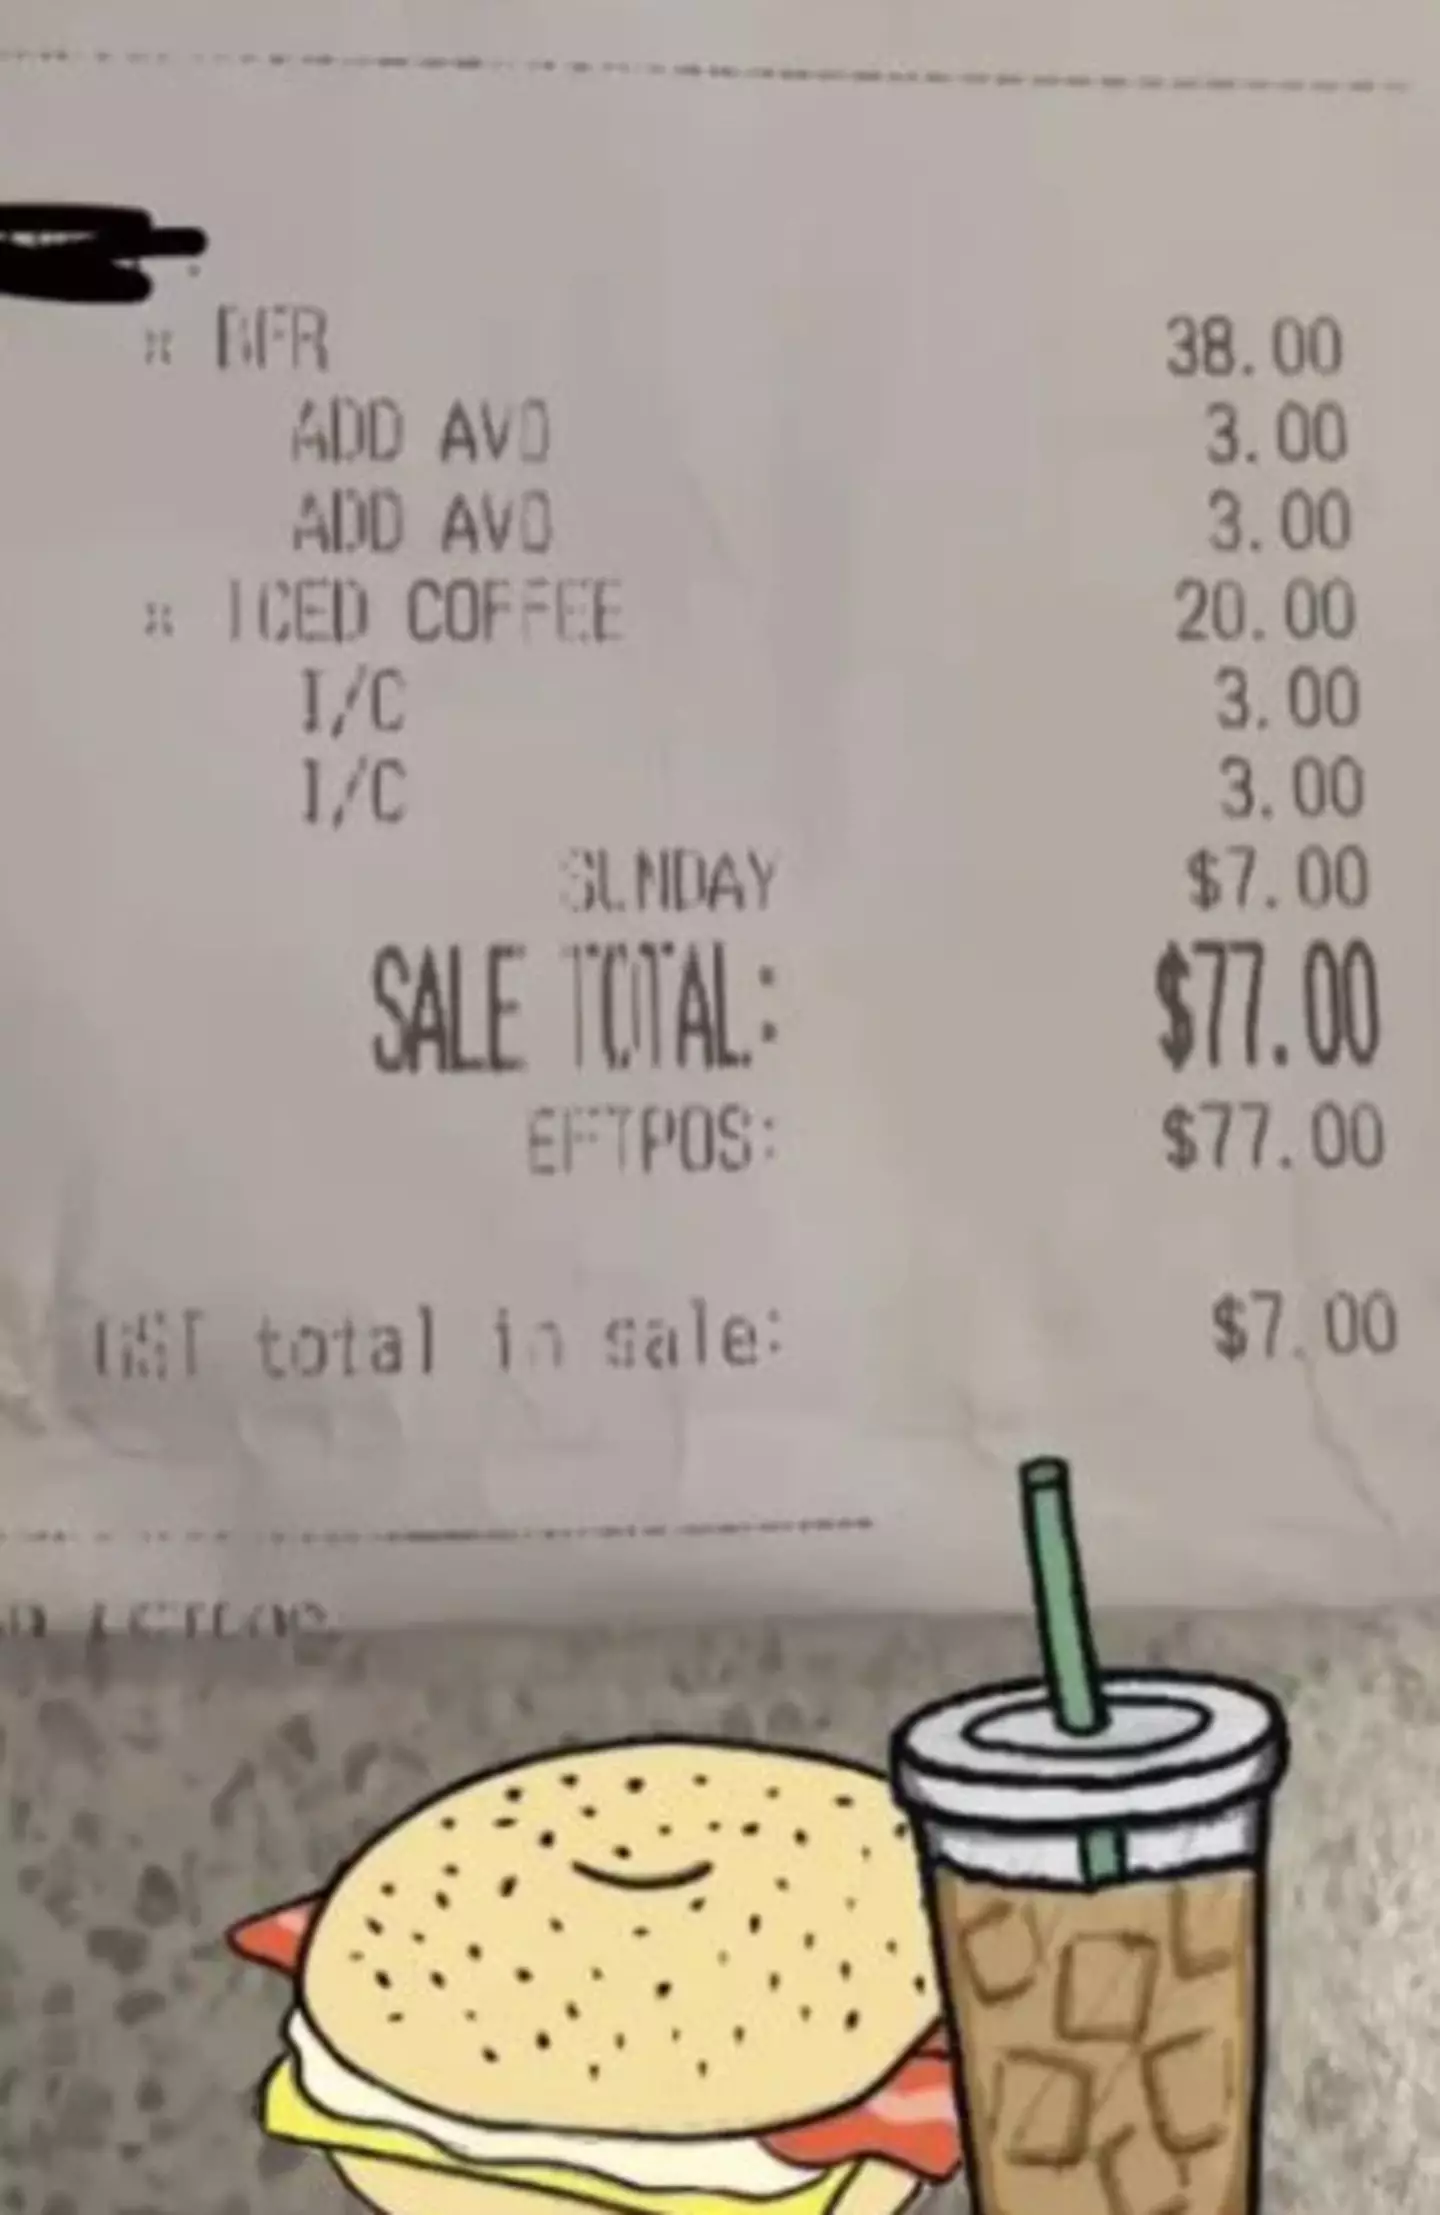 The total on the receipt.